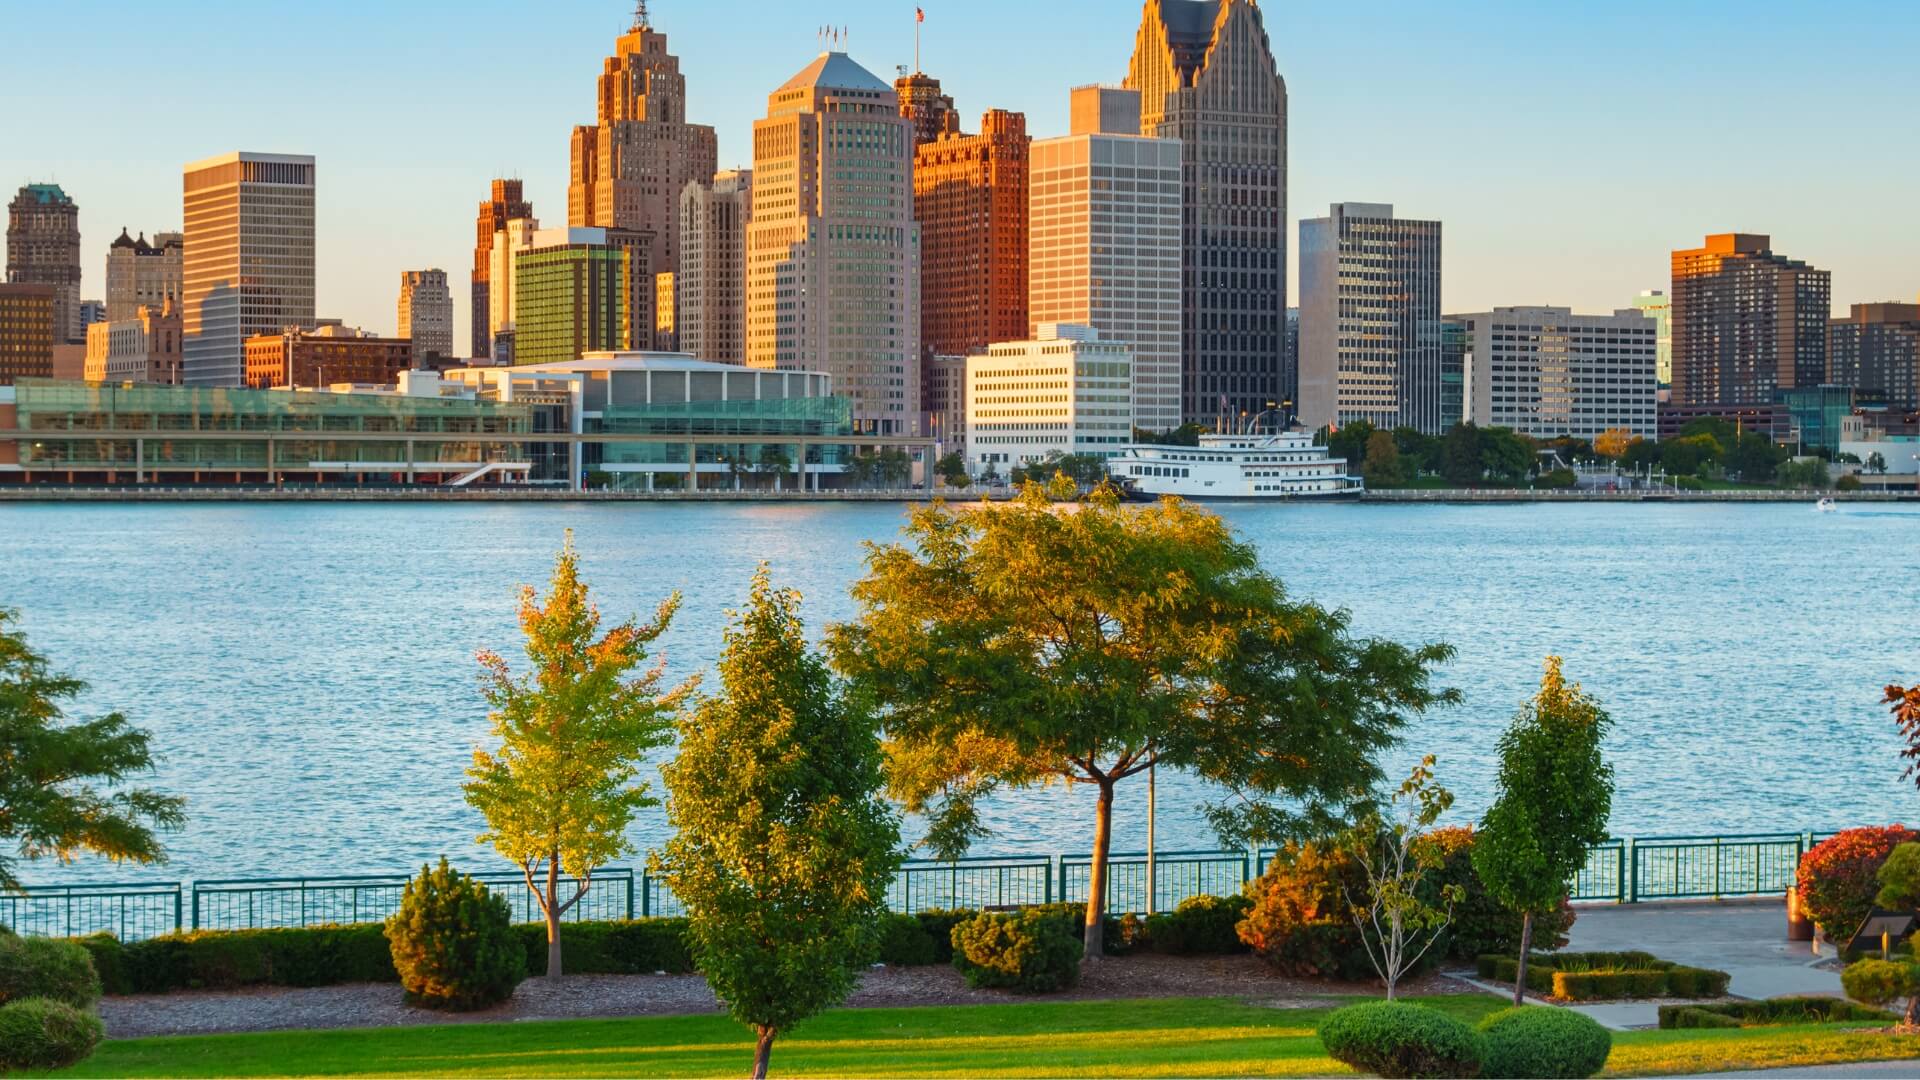 a view of the detroit skyline from across the water